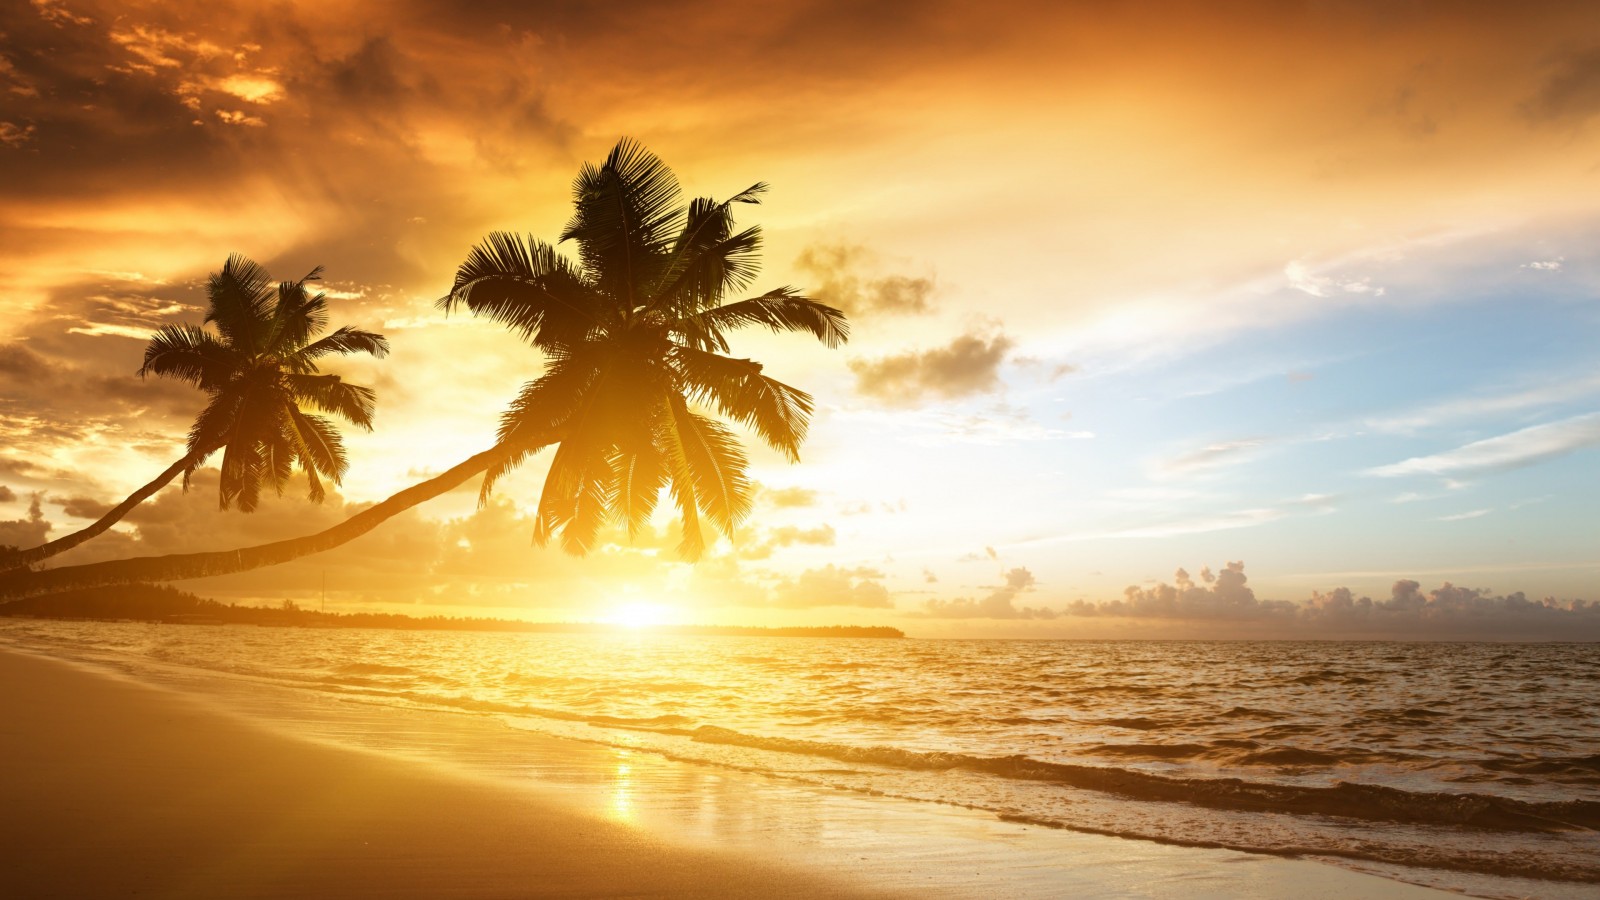 Beach With Palm Trees At Sunset Wallpaper for Desktop 1600x900